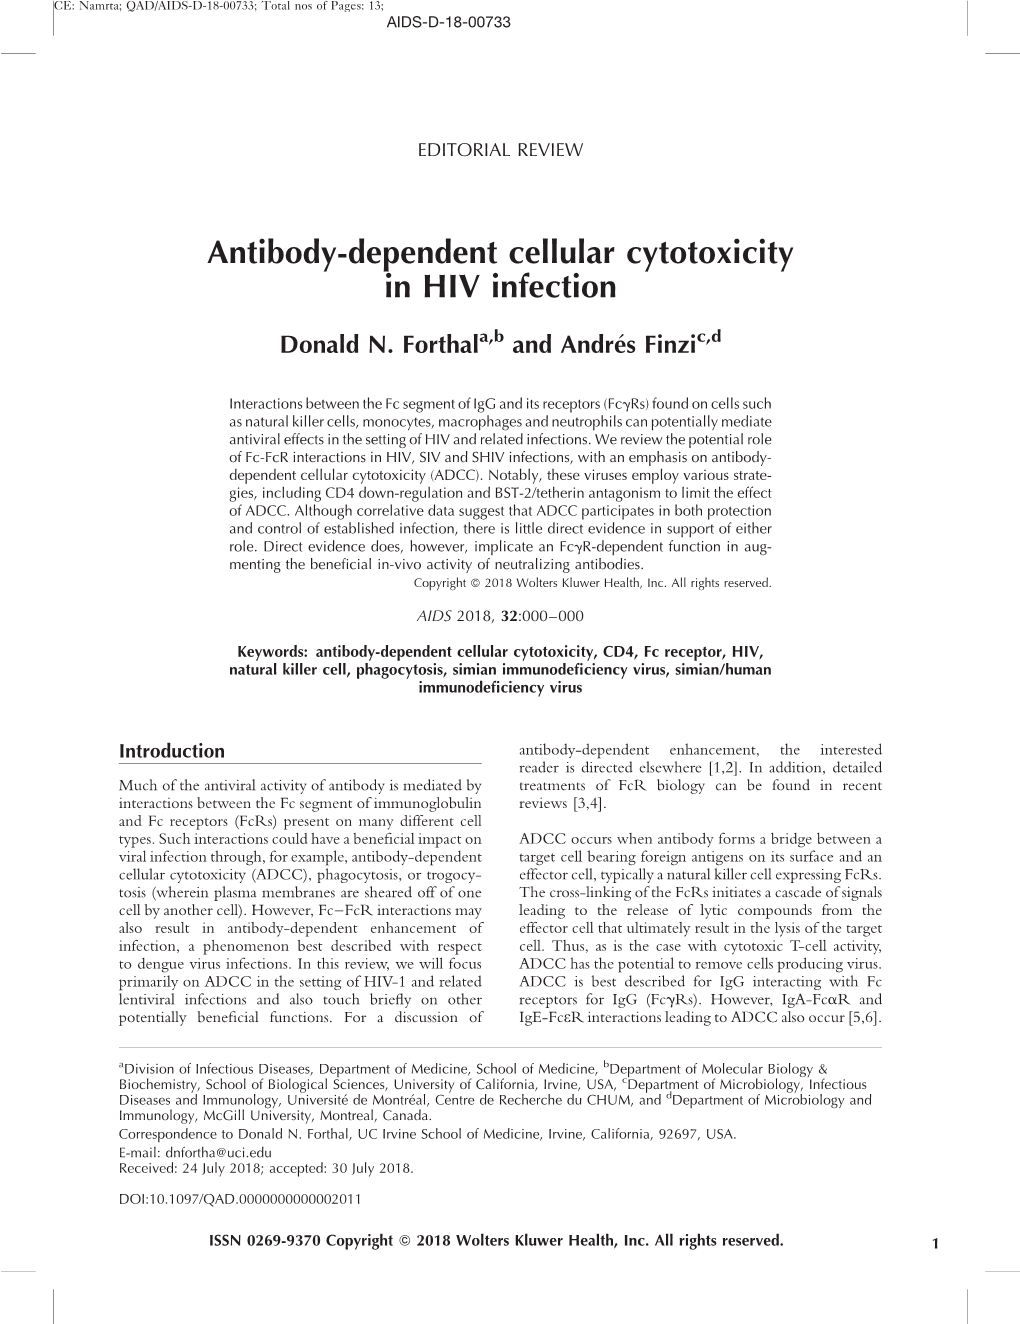 Antibody-Dependent Cellular Cytotoxicity in HIV Infection